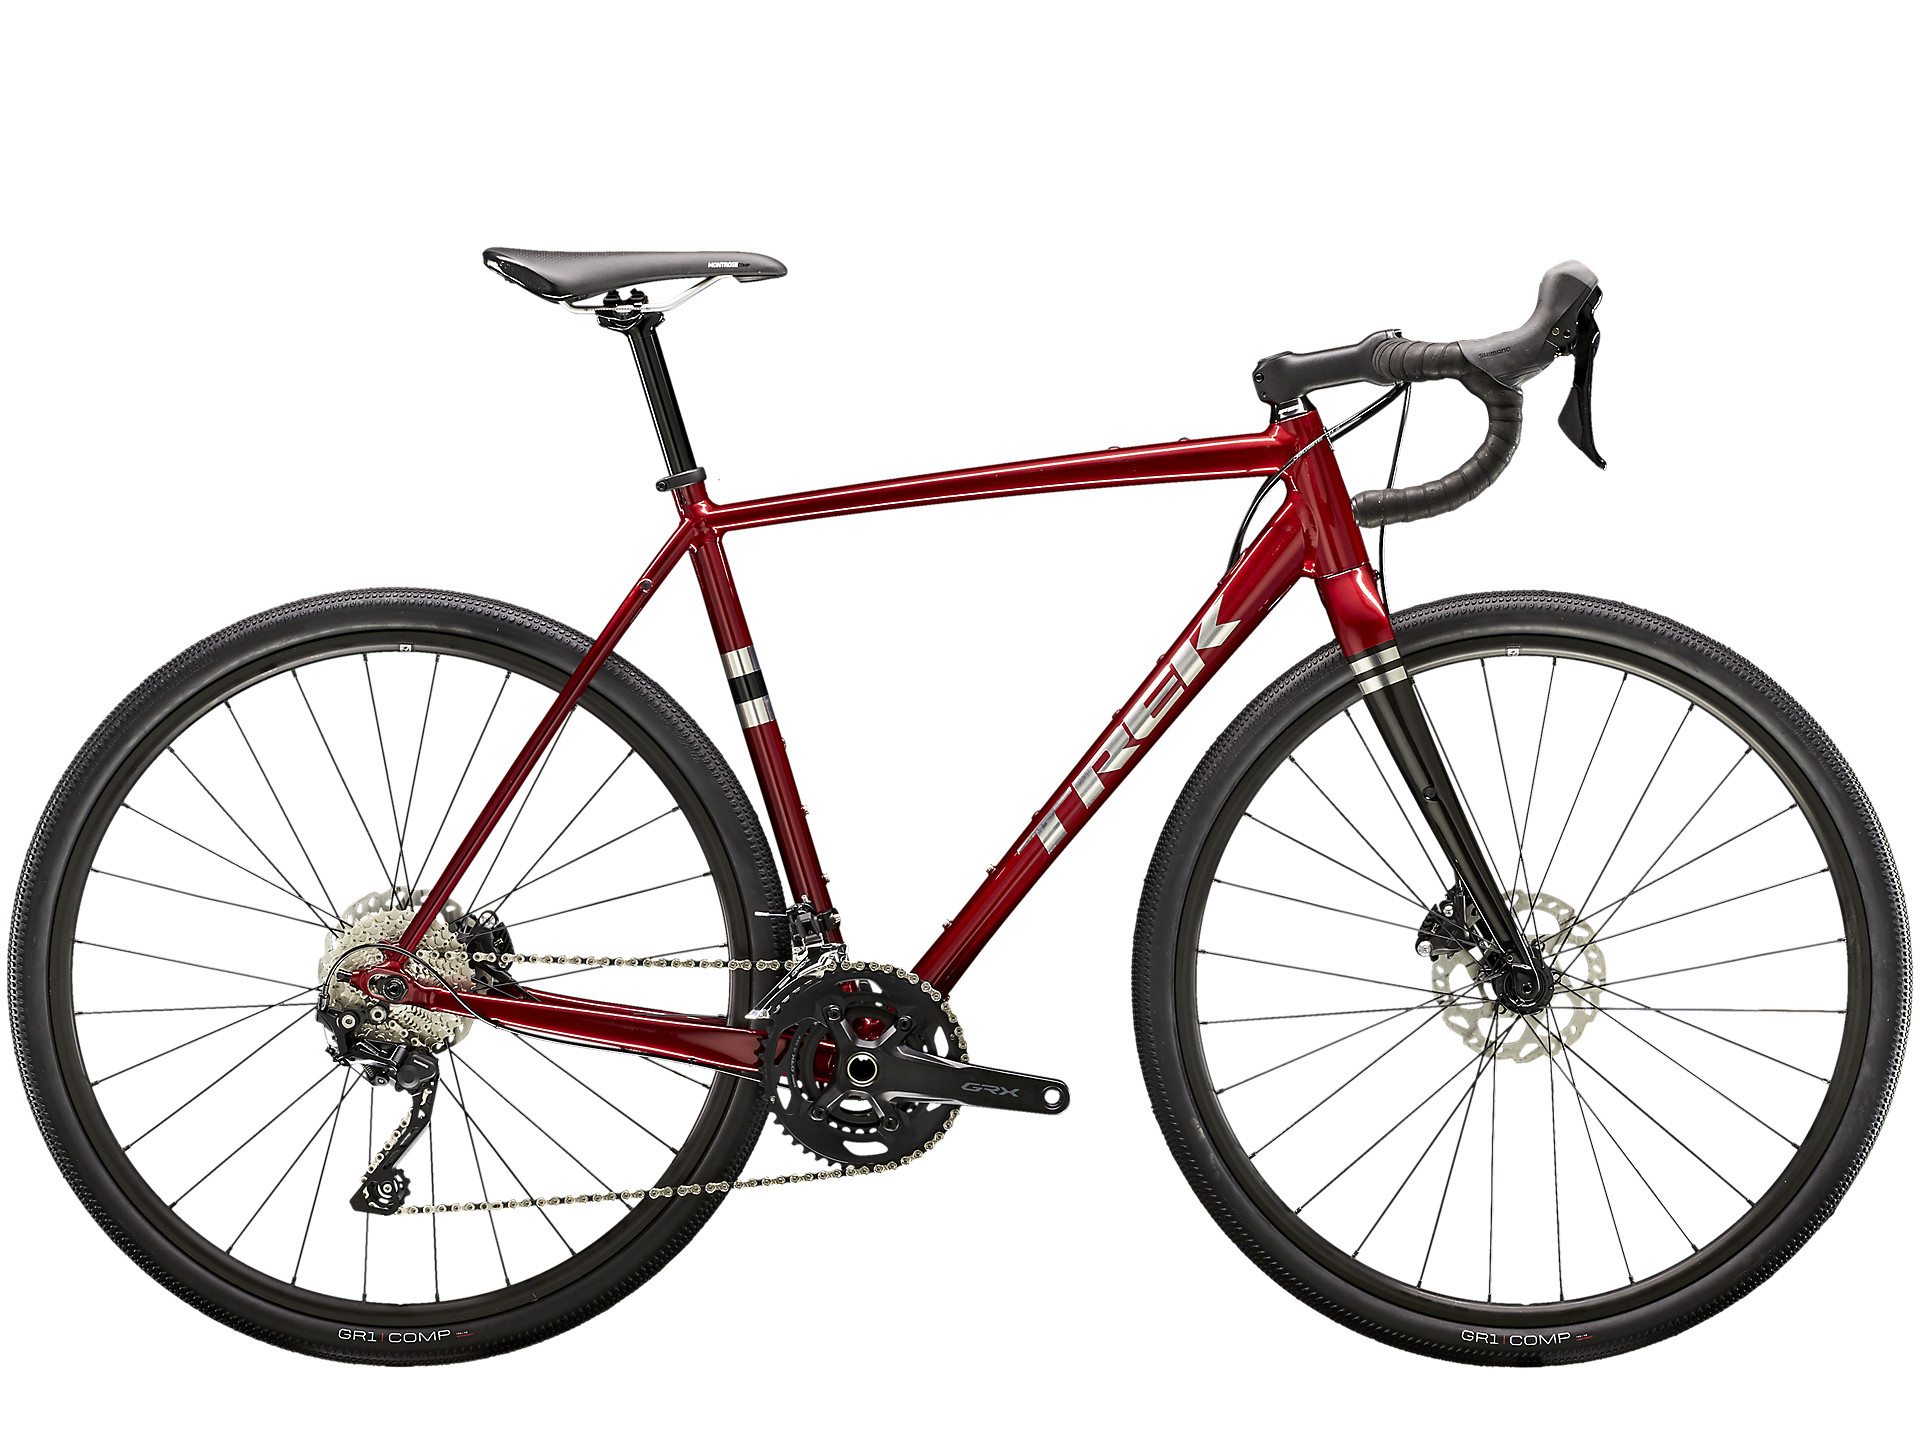 Red Trek Checkpoint ALR 4 gravel bike with disc brakes and Shimano GRX groupset